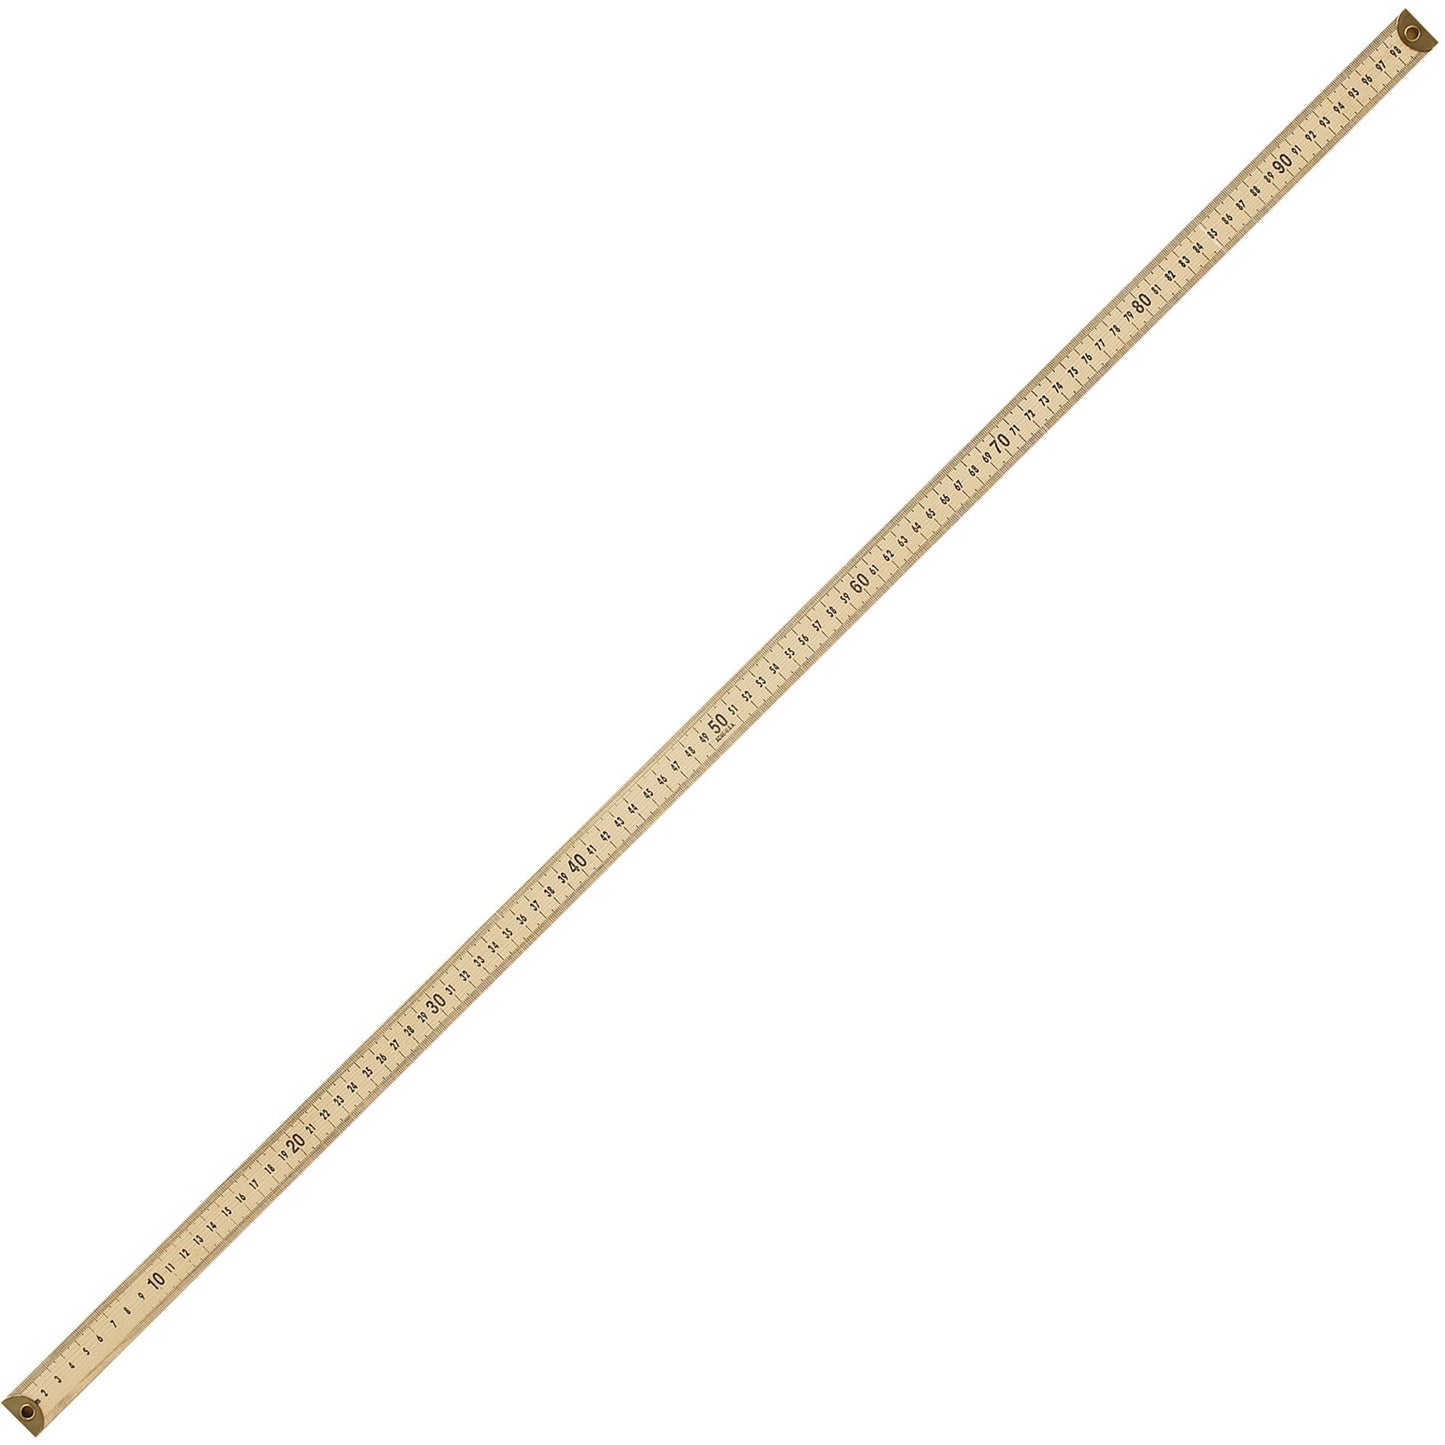 Acme United Wooden Metre Stick with Metal Ends